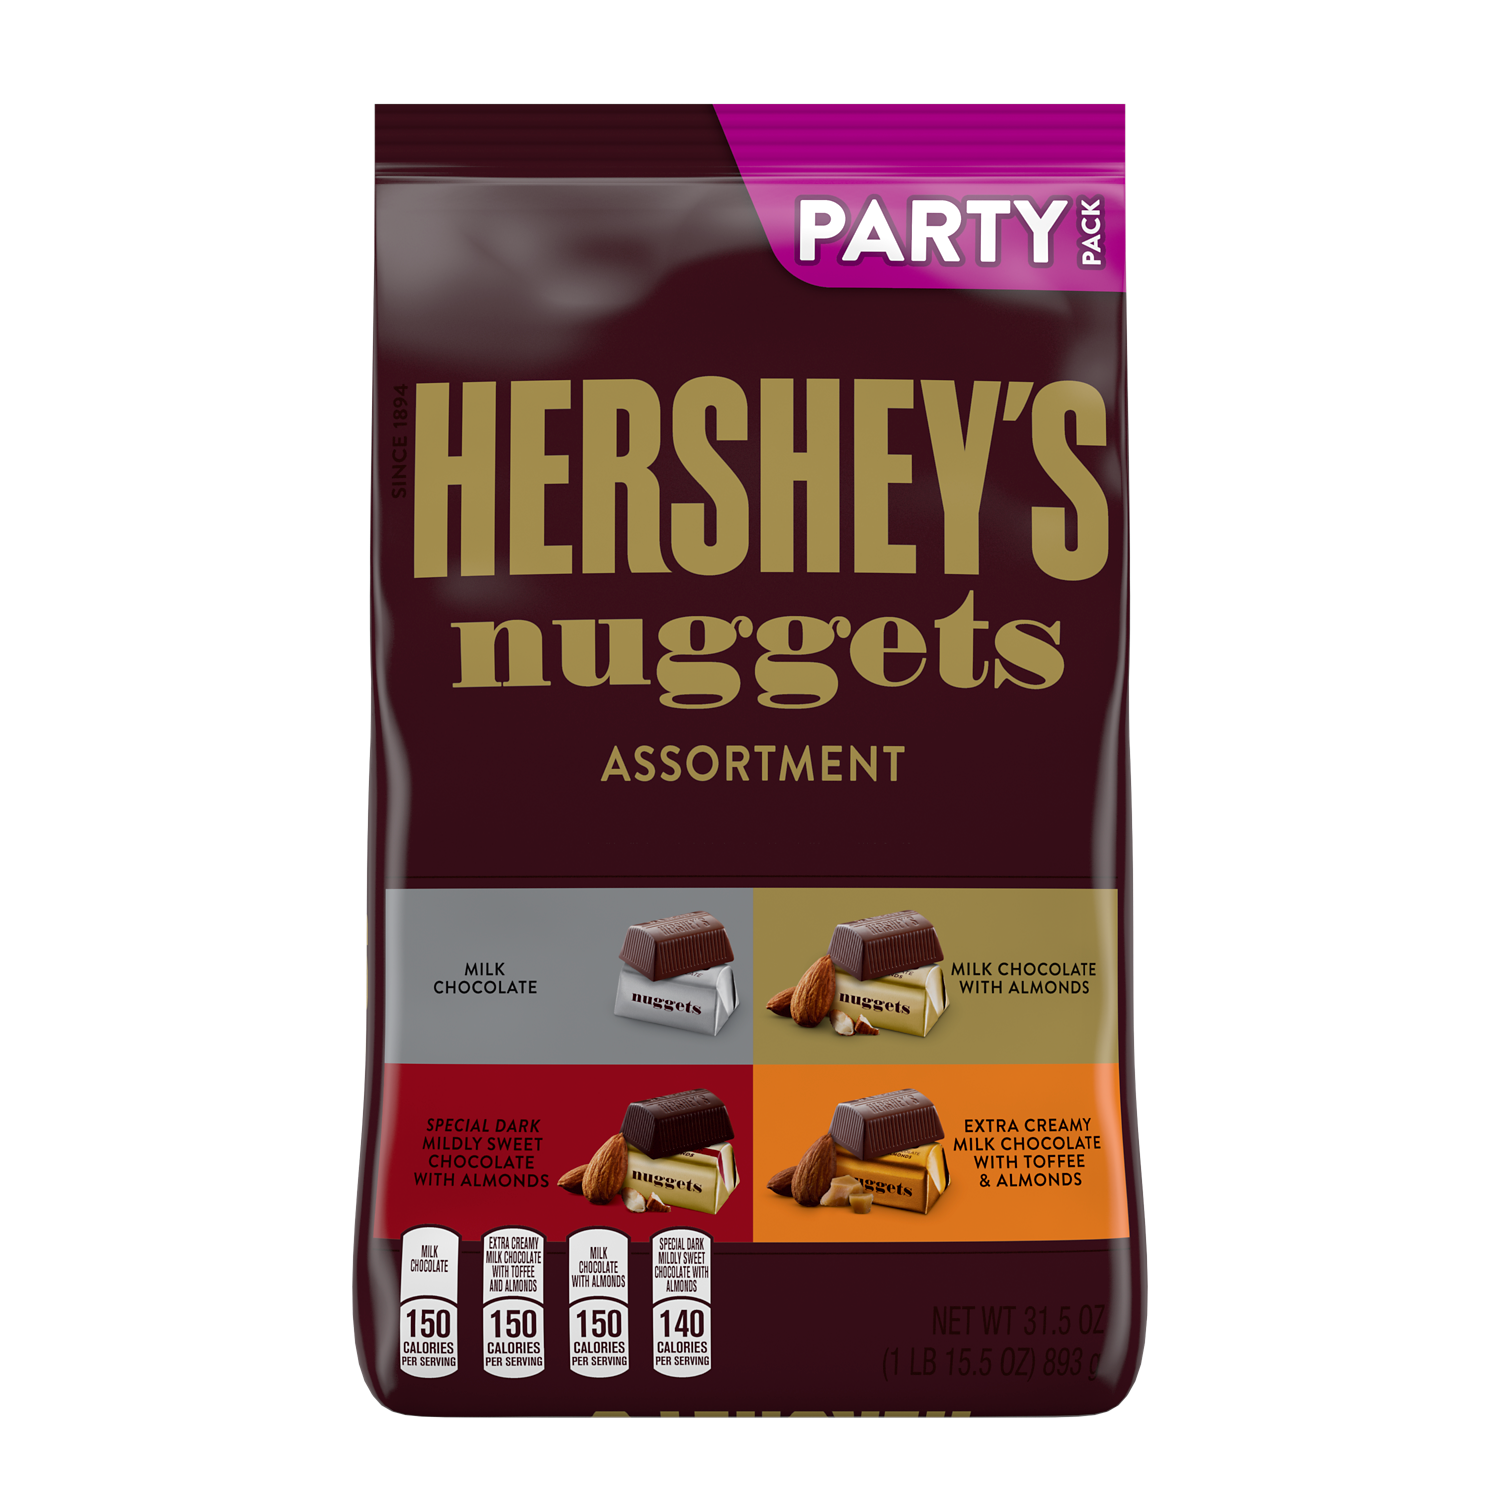 HERSHEY'S NUGGETS Snack Size Assortment, 31.5 oz pack - Front of Package